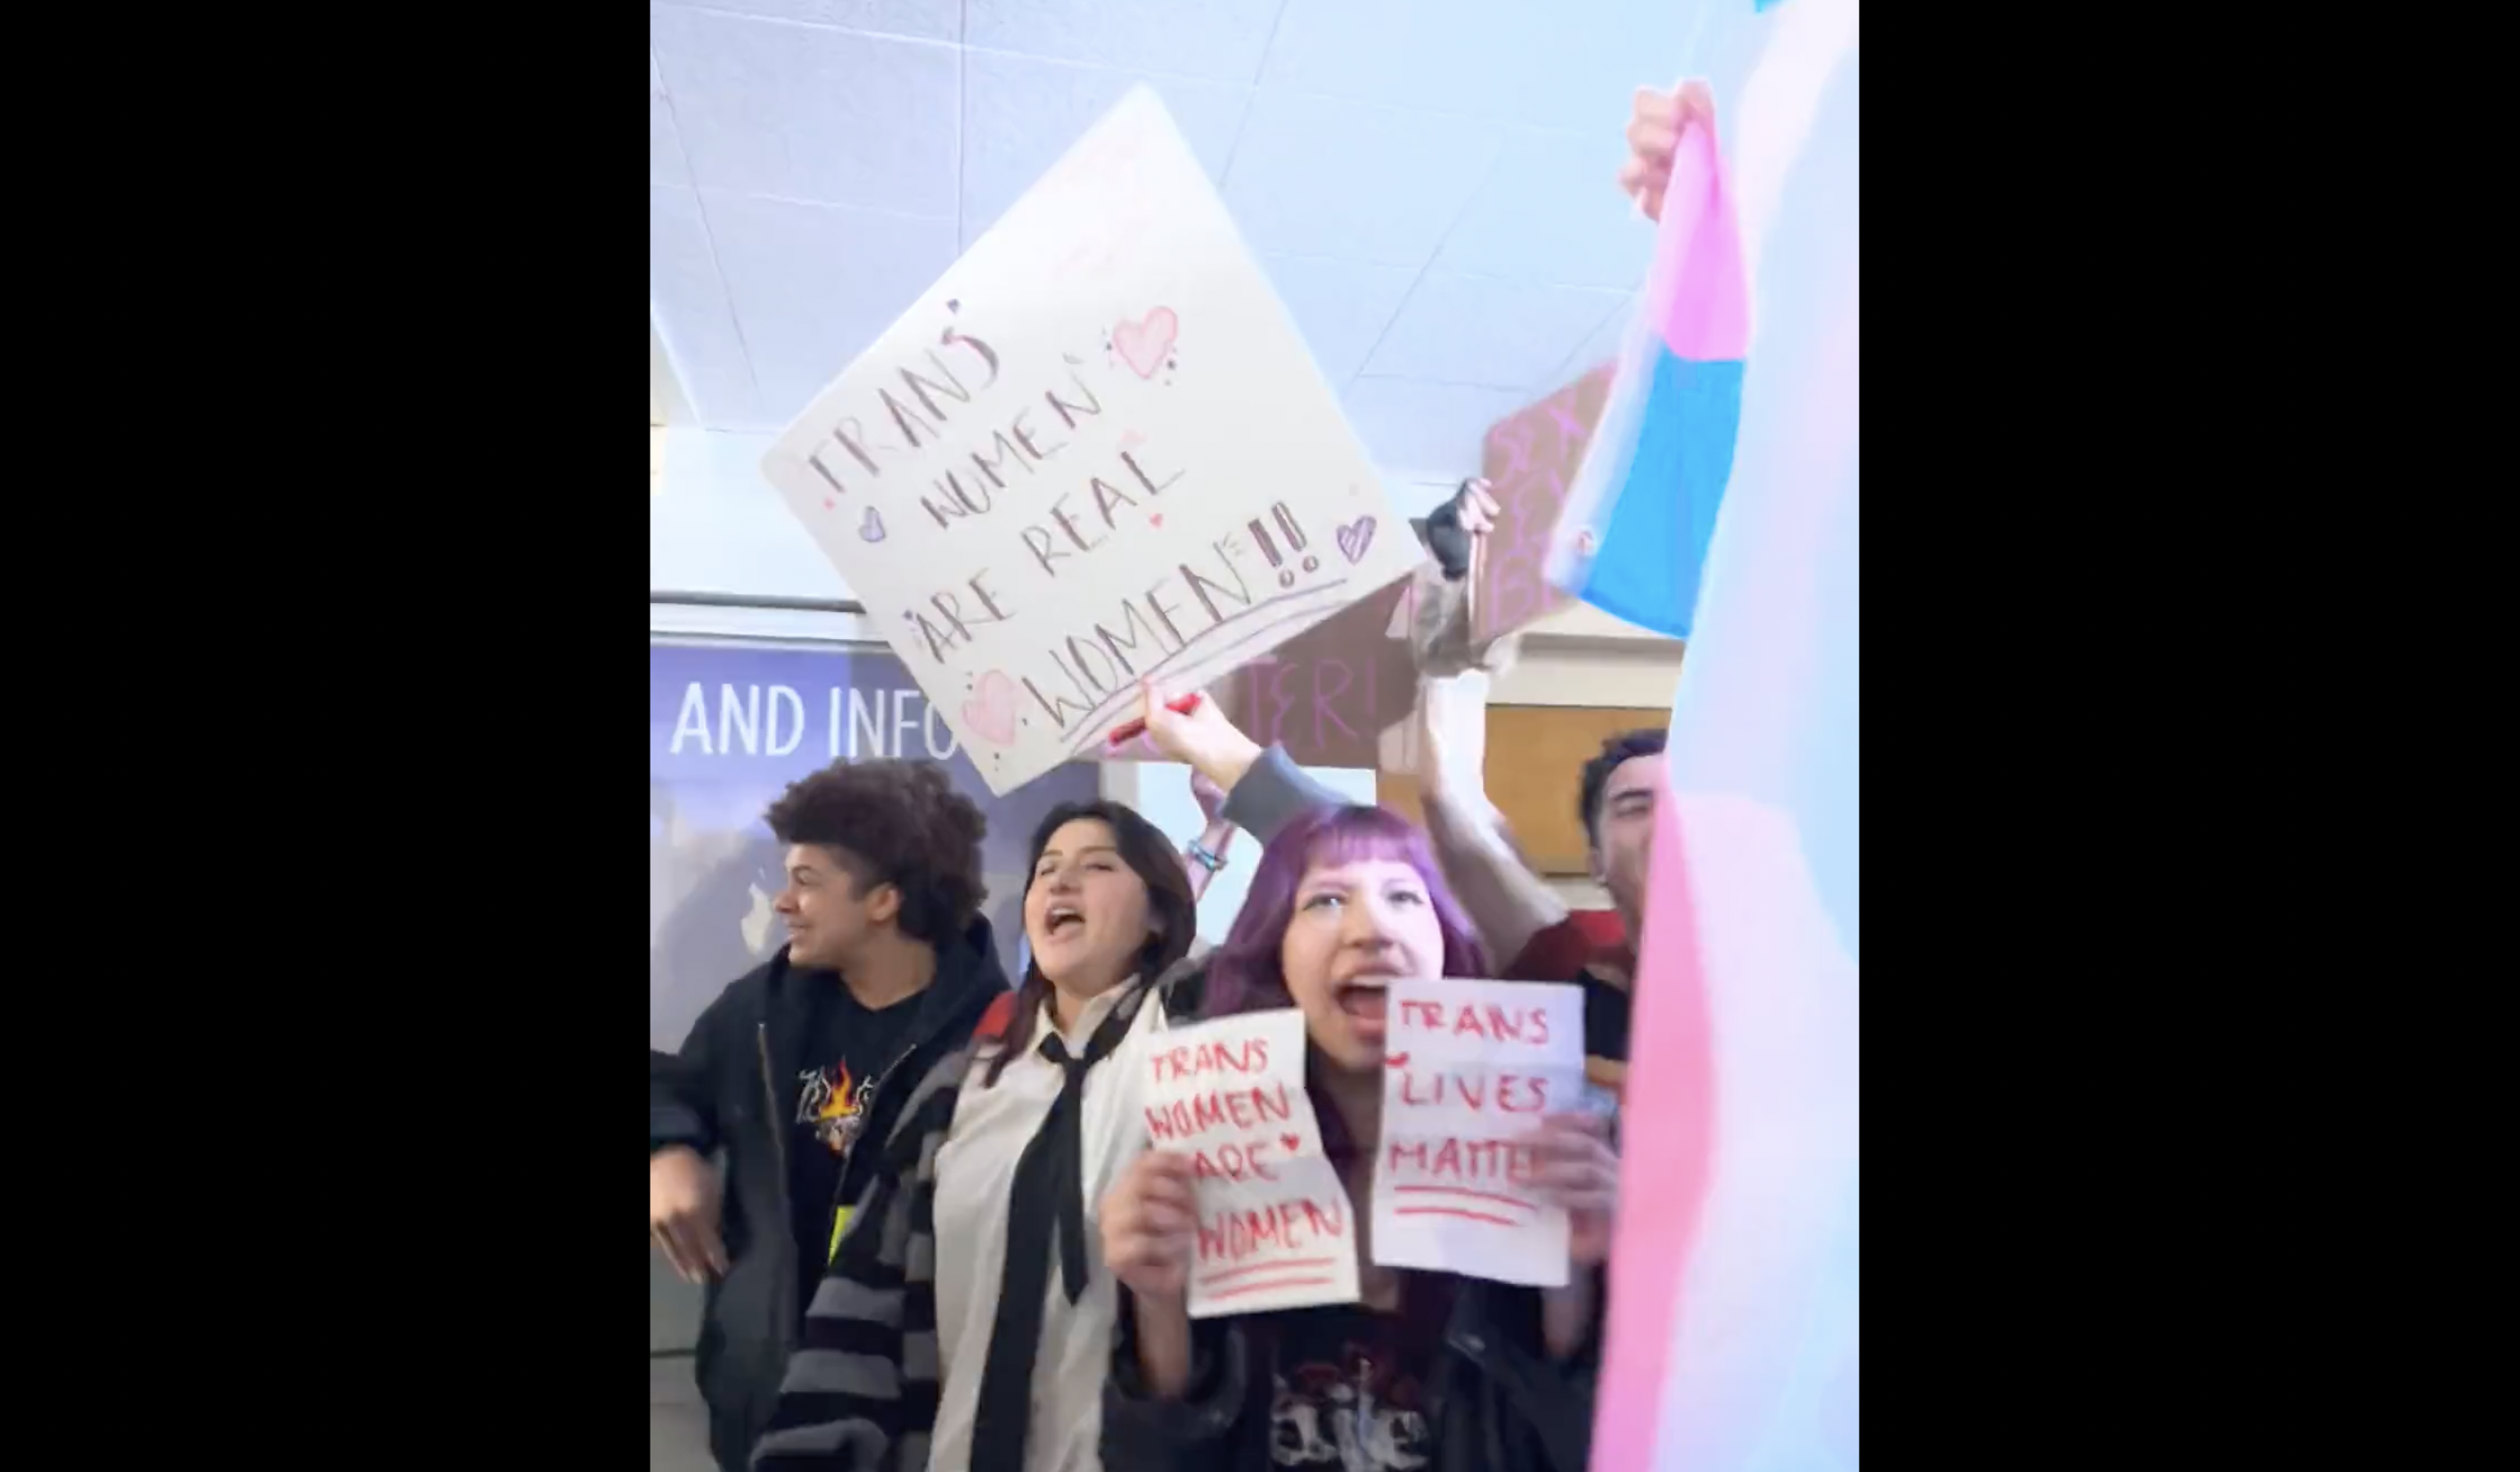 SFSU says Riley Gaines event was 'deeply traumatic' for trans community